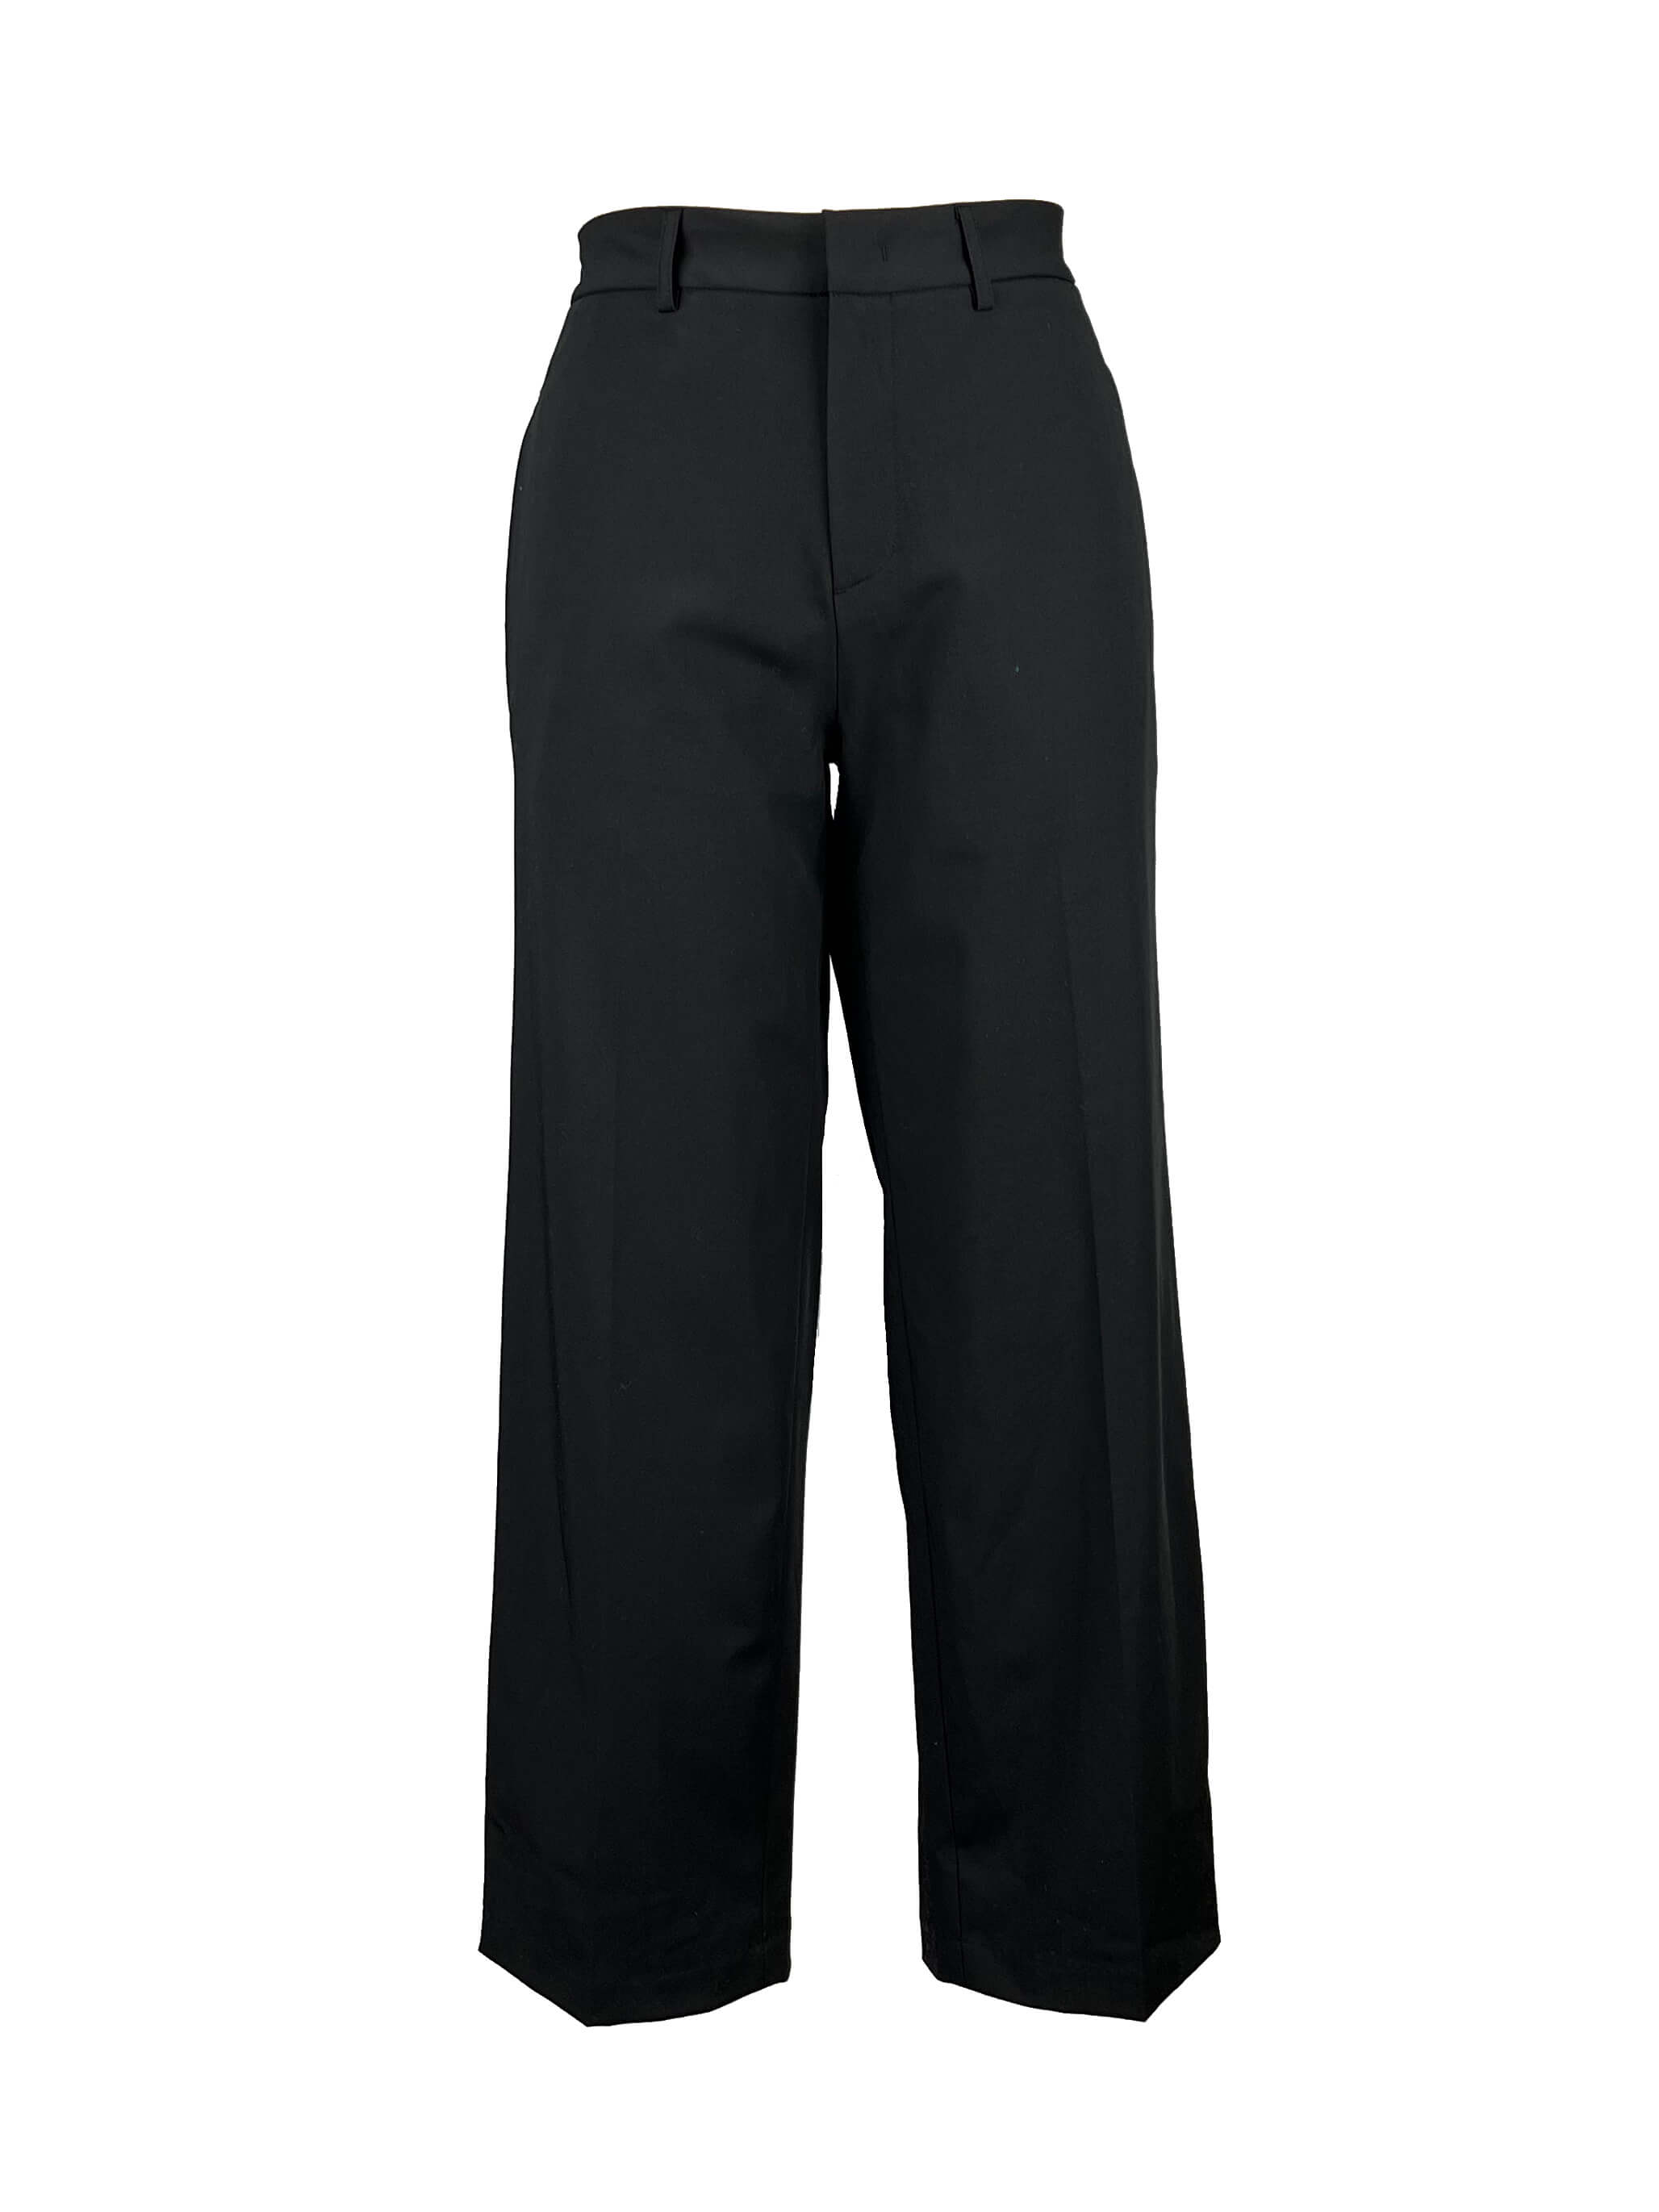 6.trousers (1)